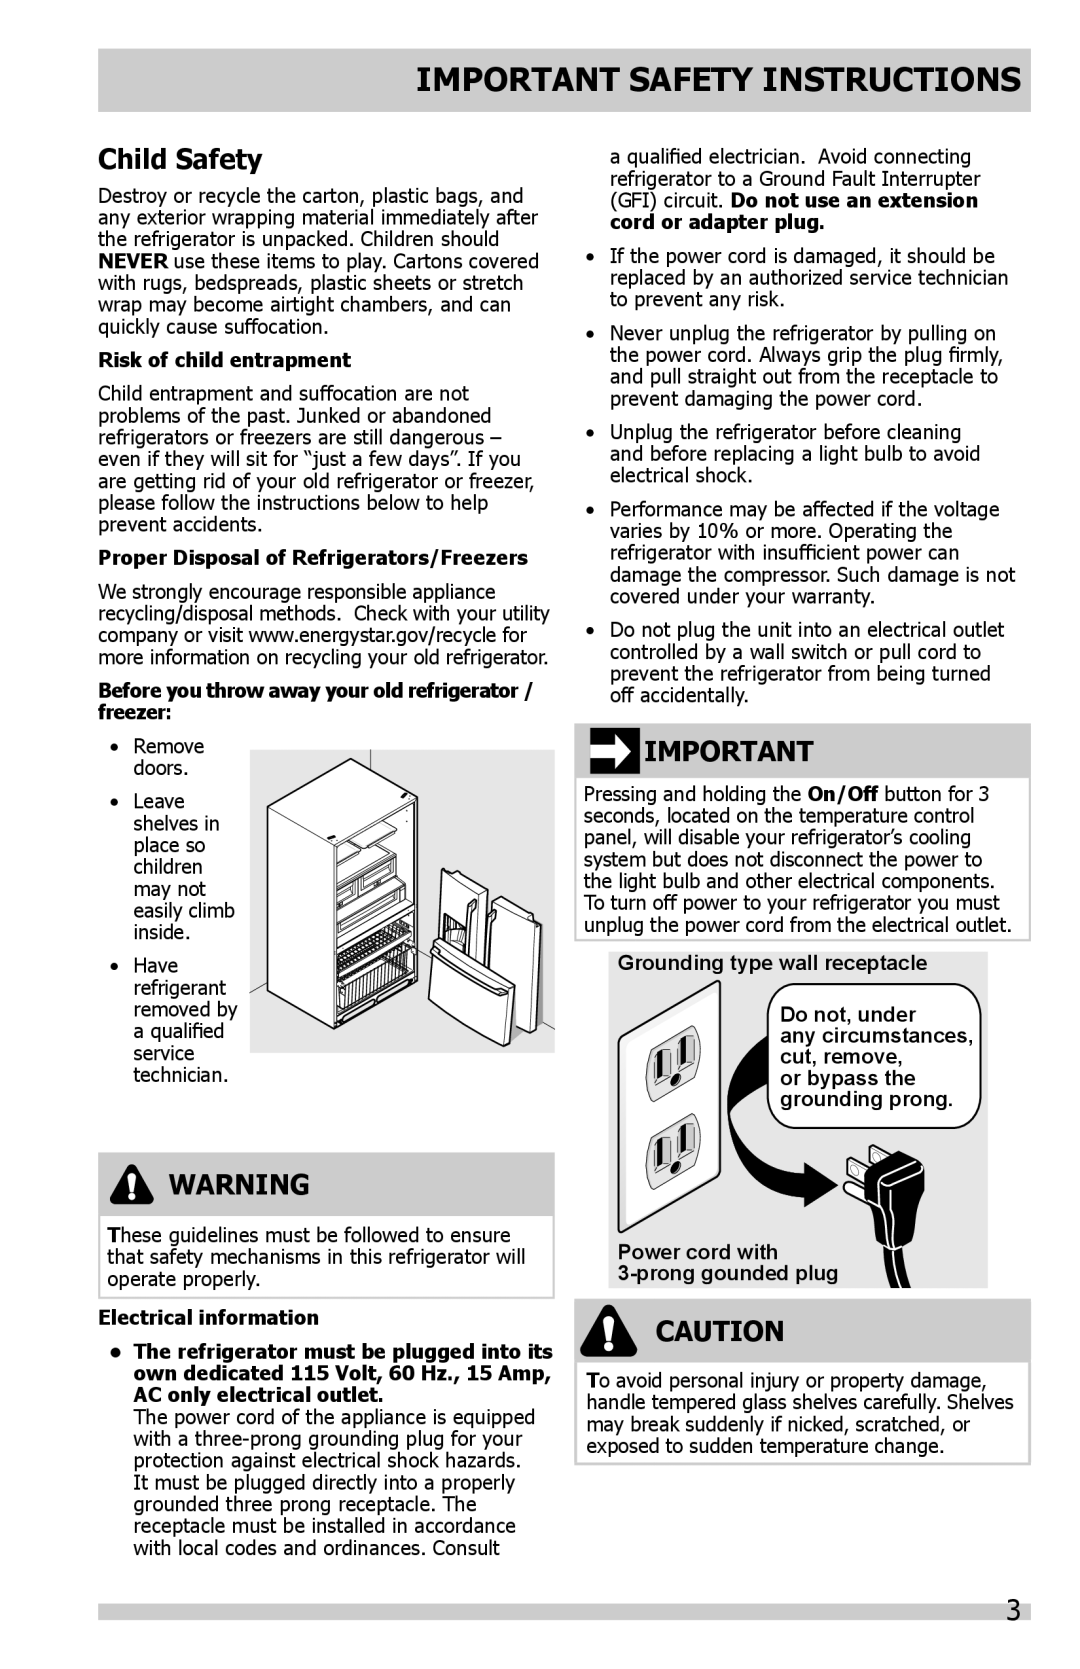 Frigidaire FGHB2844LE Child Safety, Important Safety Instructions, Risk of child entrapment, Electrical information 